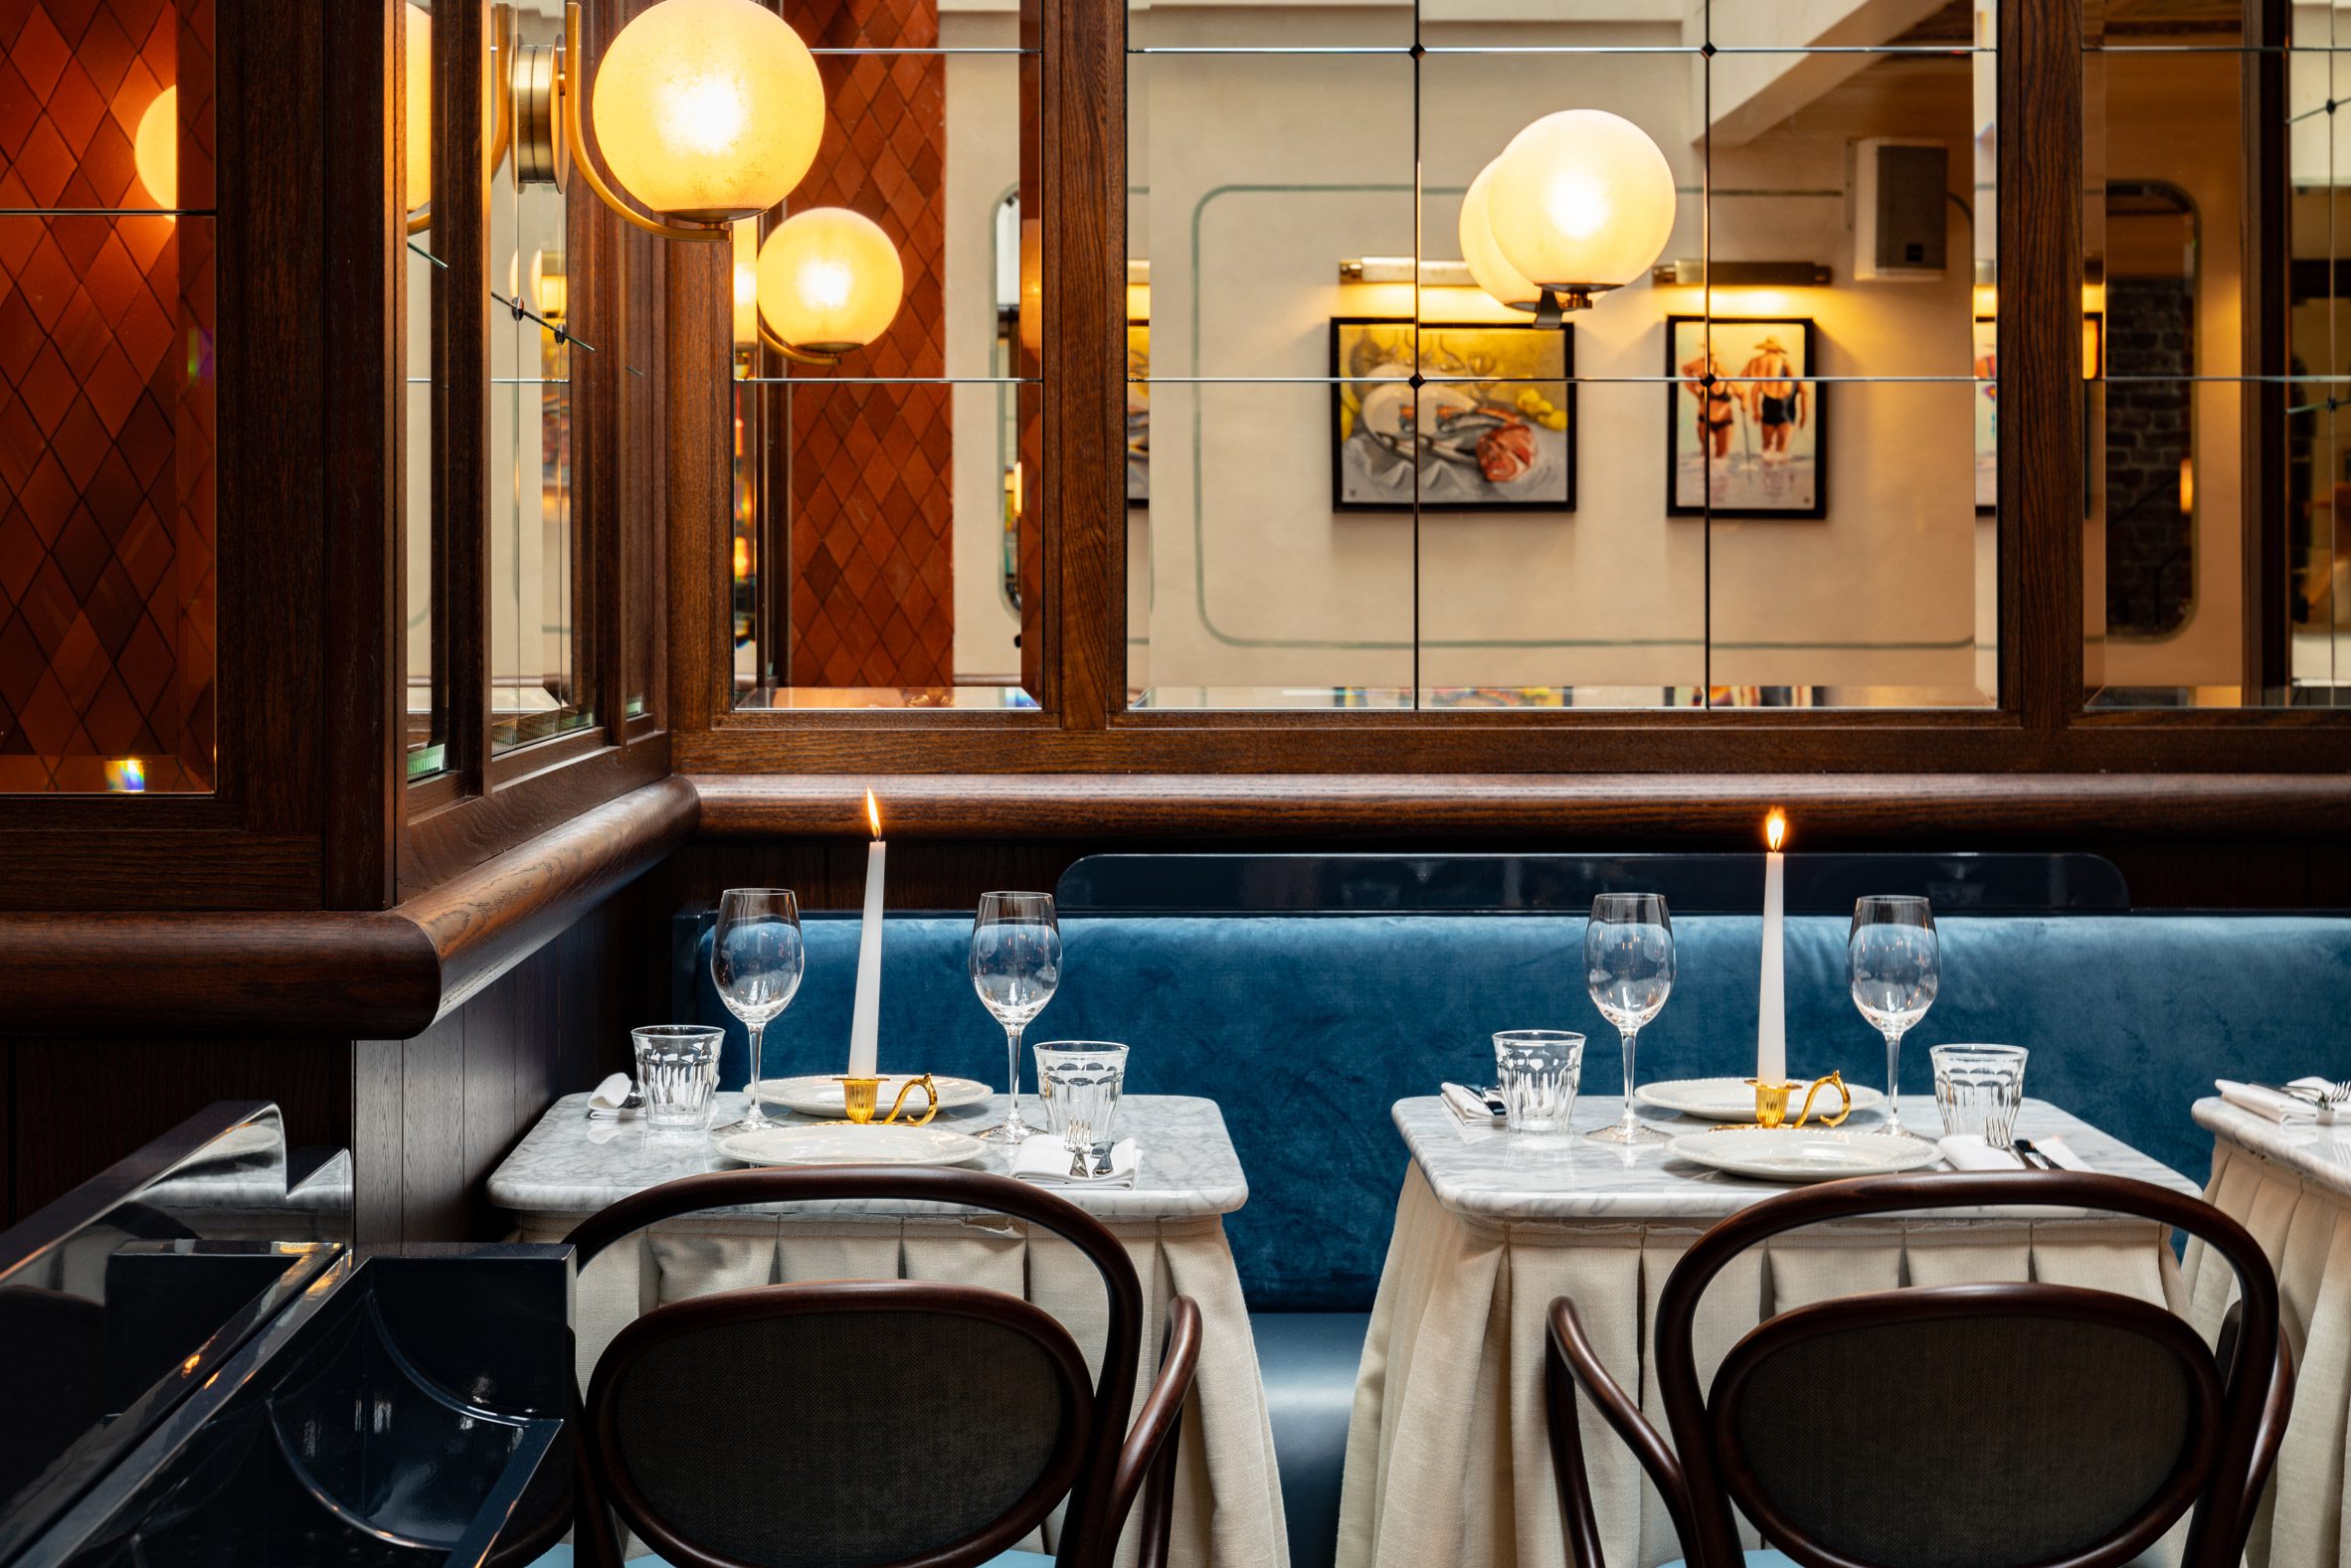 Tables and mirrors inside London eatery by Dorothee Meilichzon